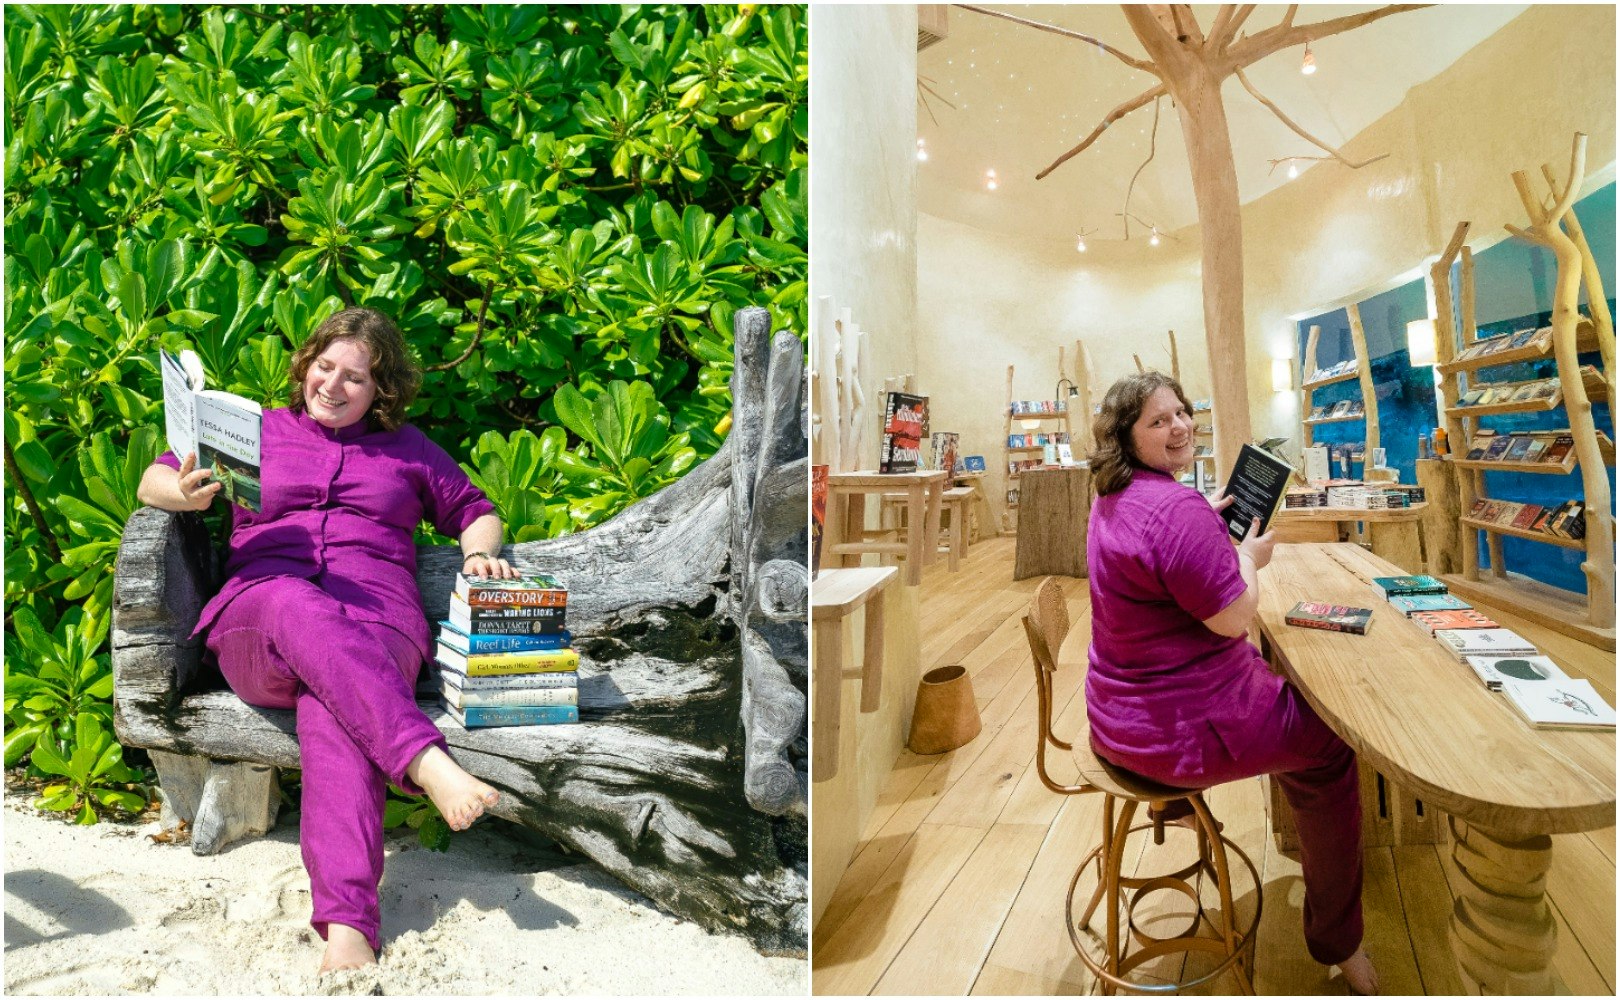 Split screen shot of woman posing with books under a tree and in a bookshop